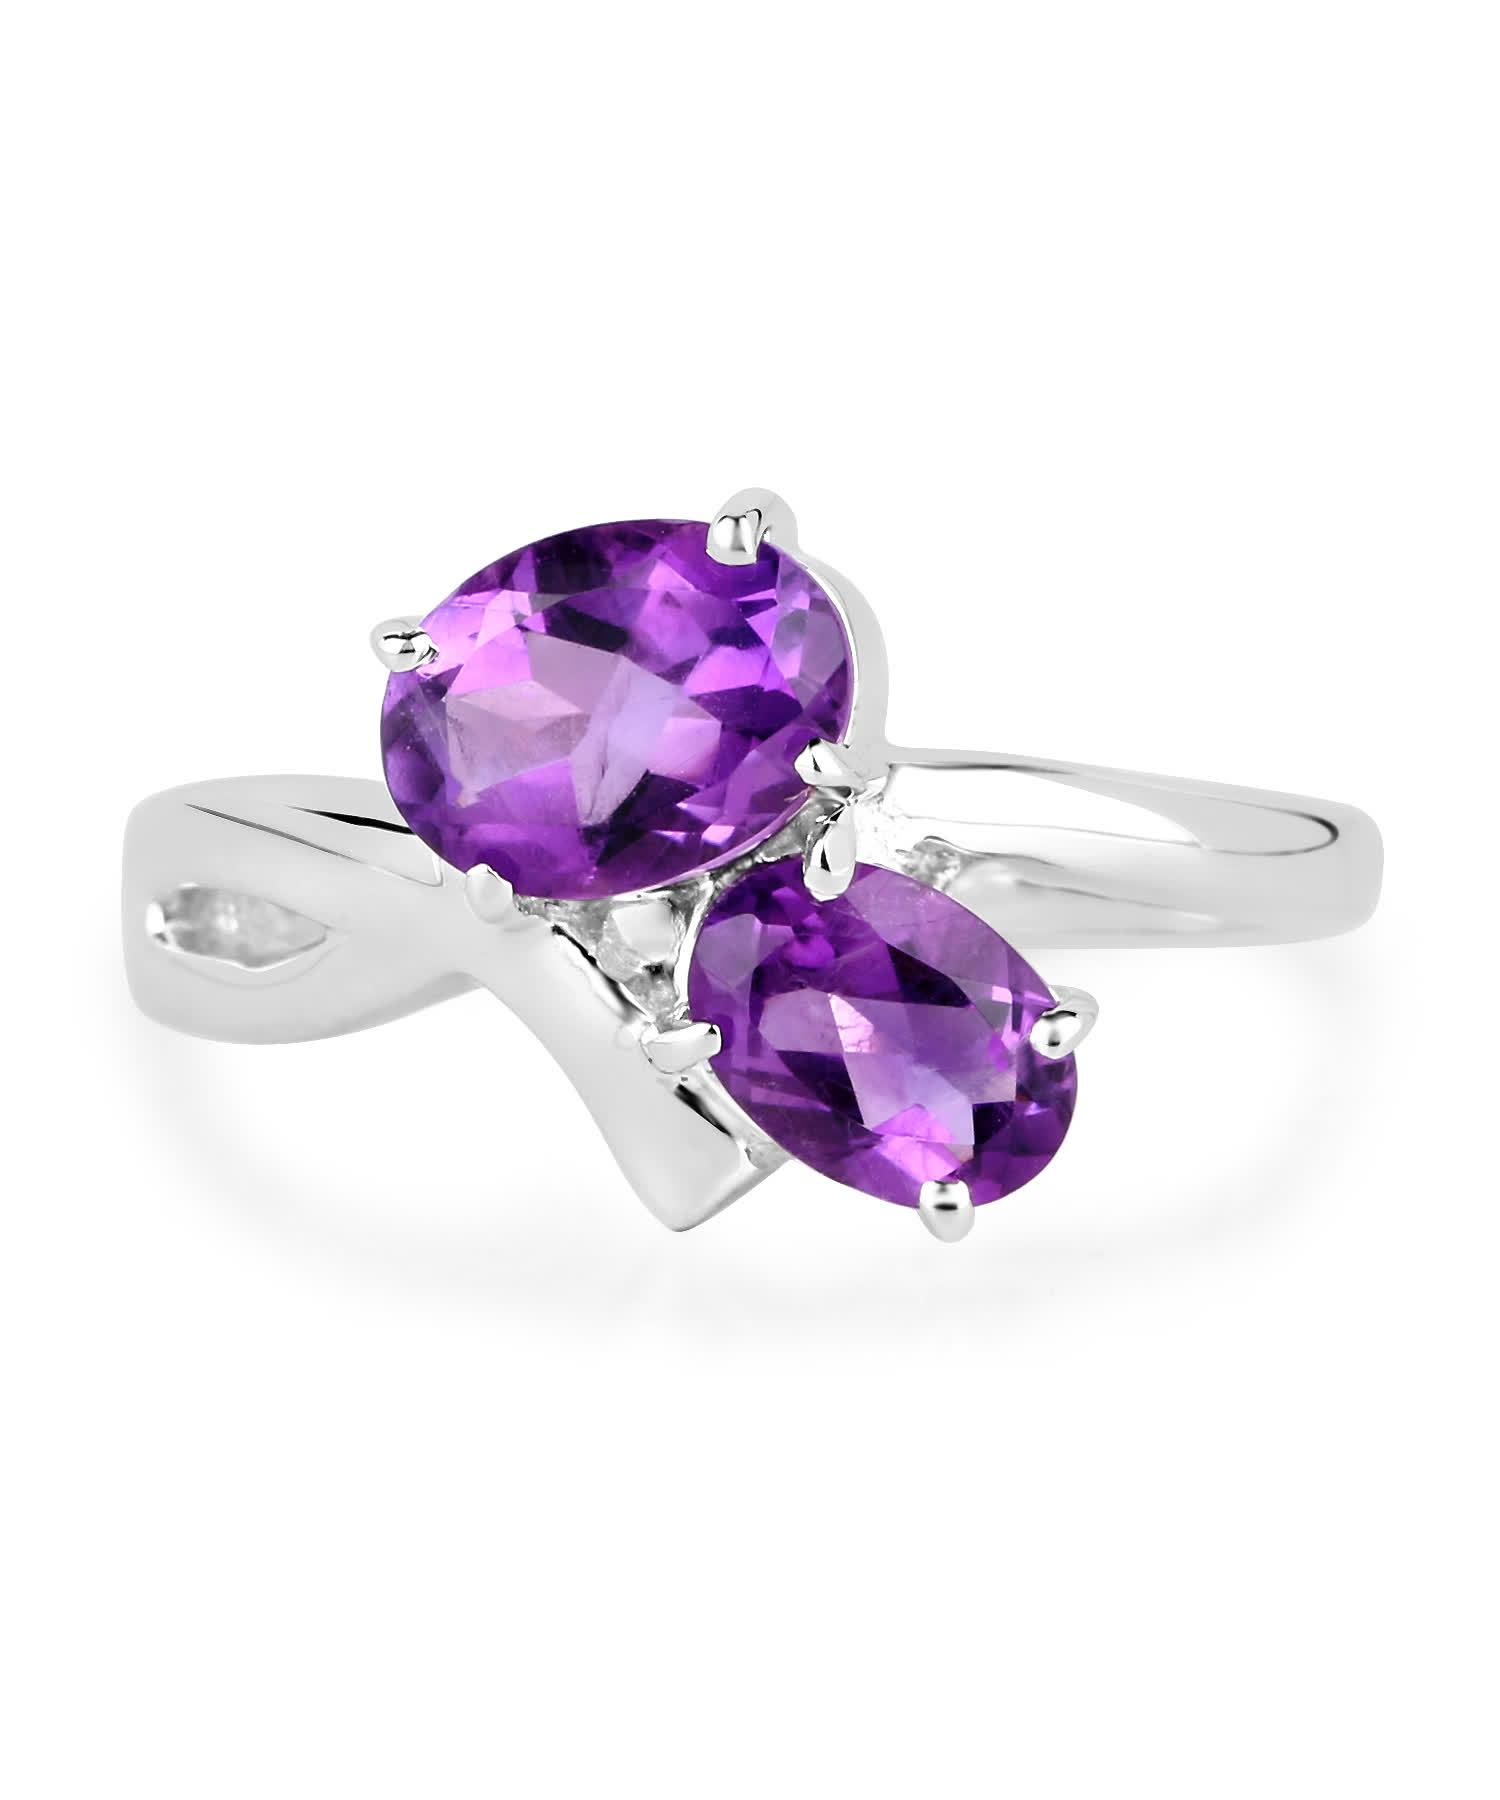 1.95ctw Natural Amethyst Rhodium Plated 925 Sterling Silver Two-Stone Ring View 3